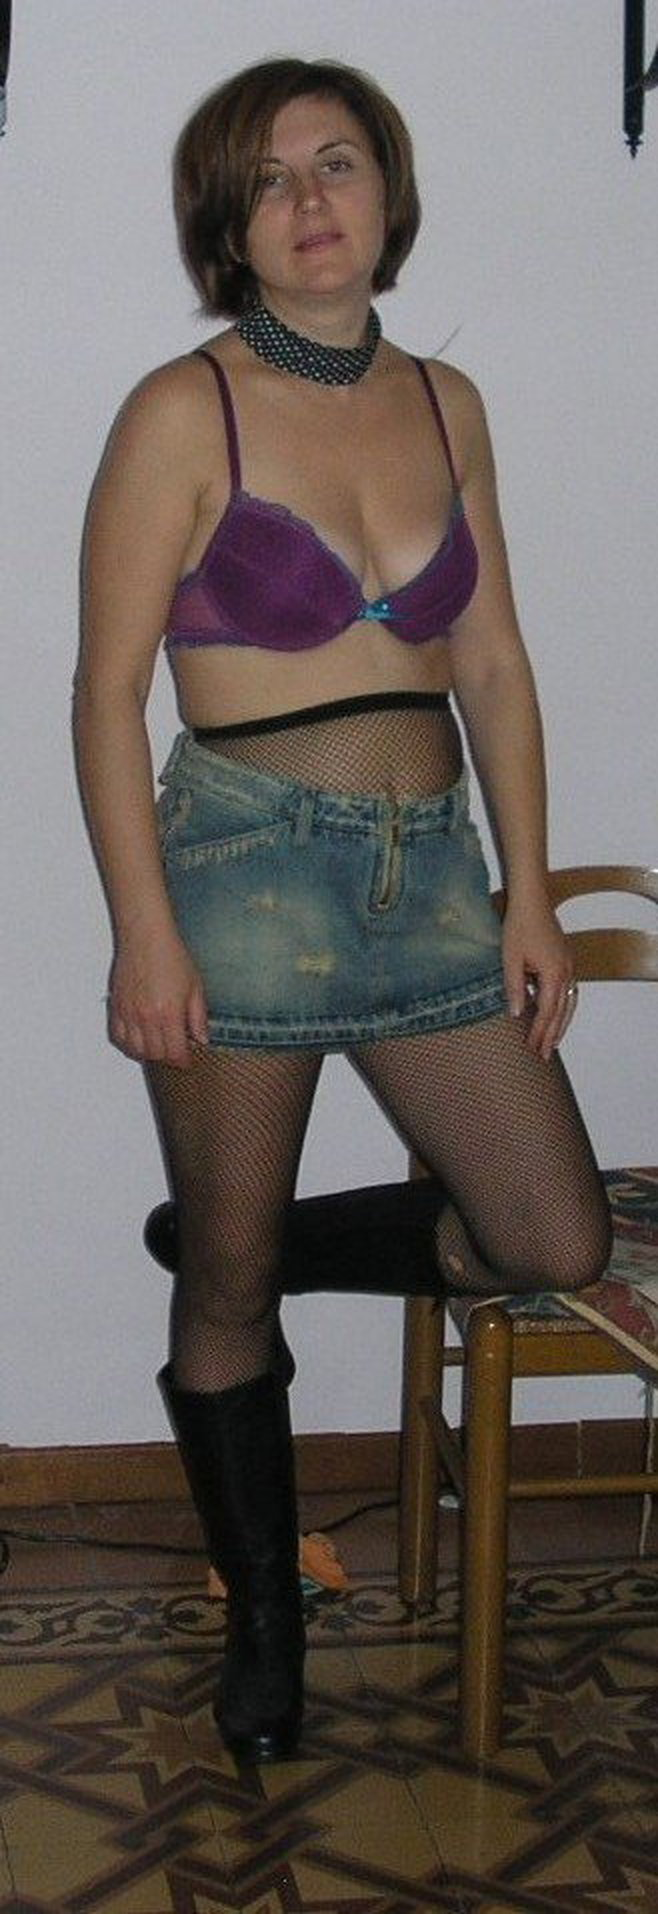 Photo by qwerty1400 with the username @qwerty1400,  April 12, 2022 at 7:52 PM. The post is about the topic Amateurs and the text says 'Wife dressed as a street hooker.
Want to comment her and get additional photos? l1400l1400@'